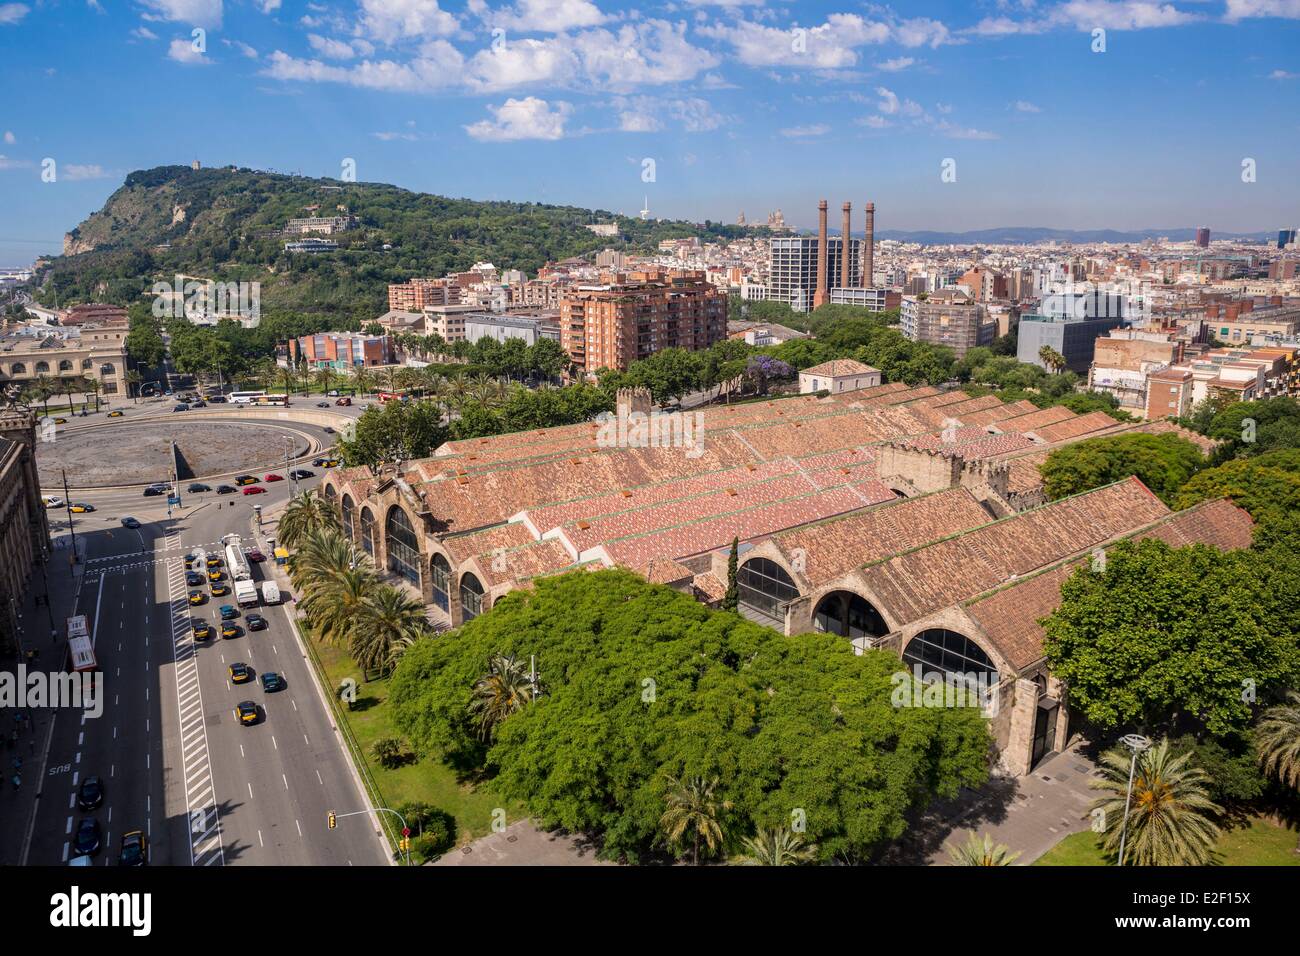 Spain, Catalonia, Barcelona, Port Vell, the Maritime Museum and Drassanes Stock Photo